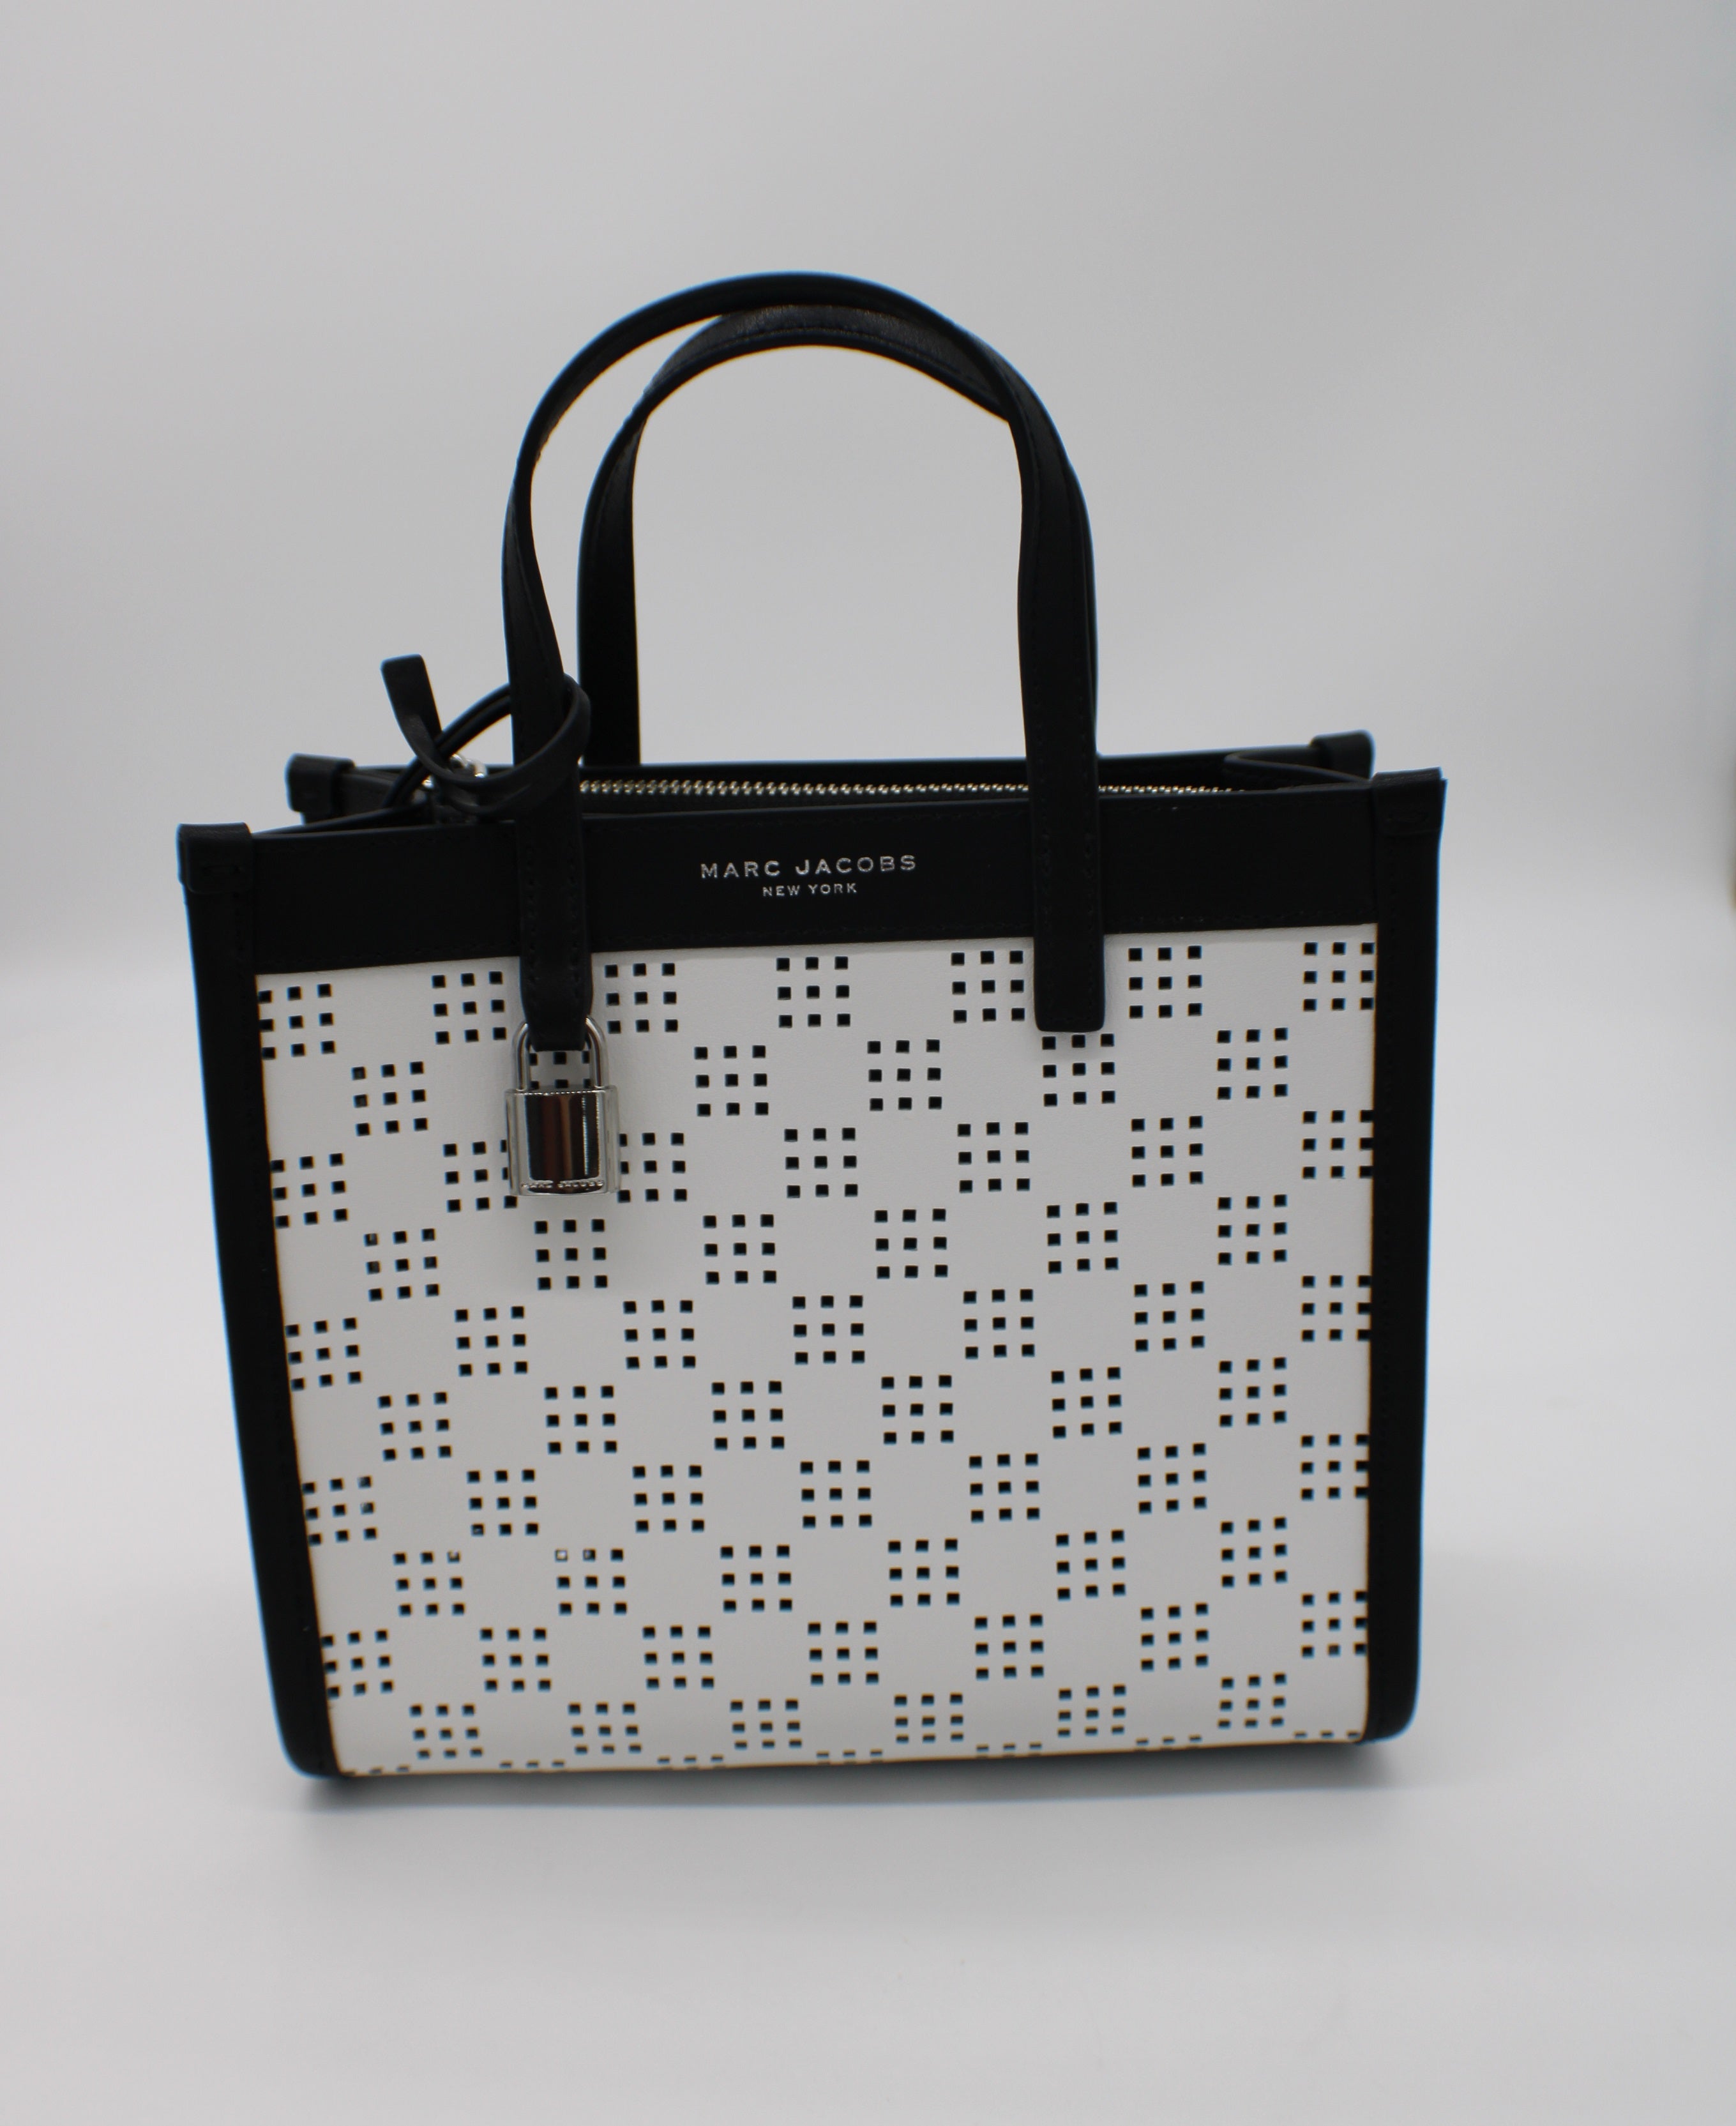 Bag Talk: Is the Marc Jacobs Tote Bag Worth It?